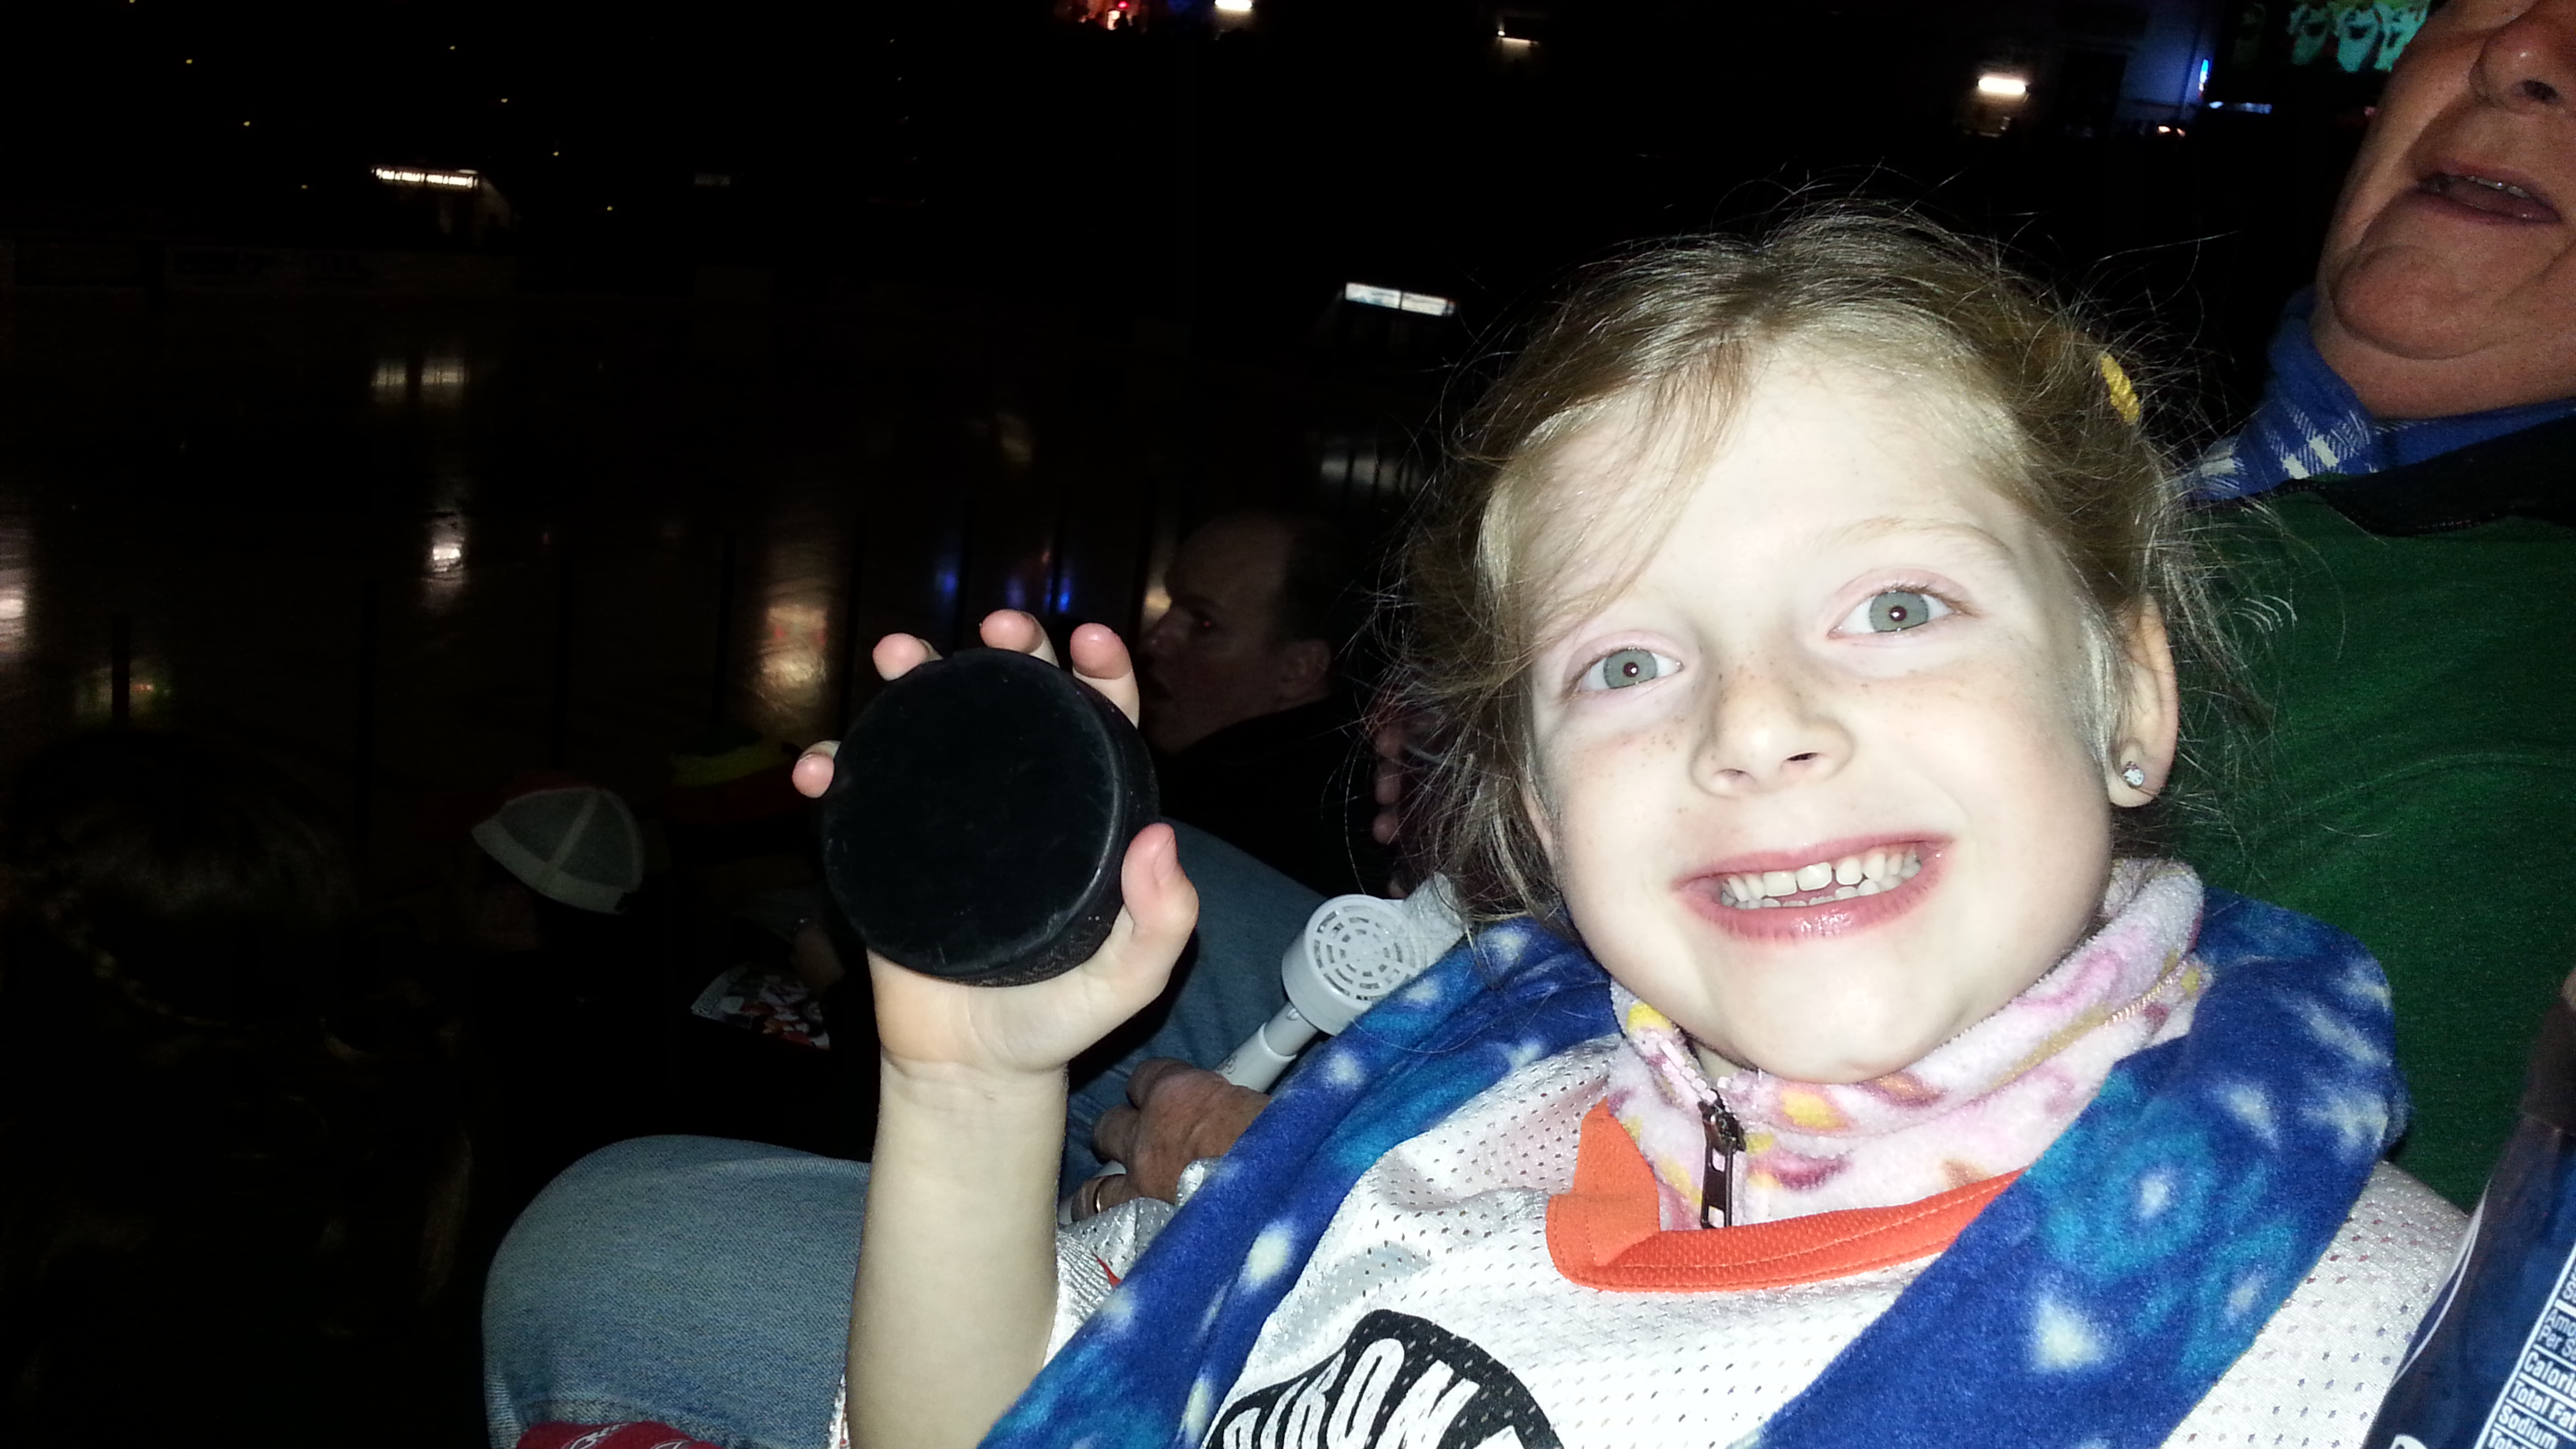 Phantoms Win, puck was tossed to Charlotte